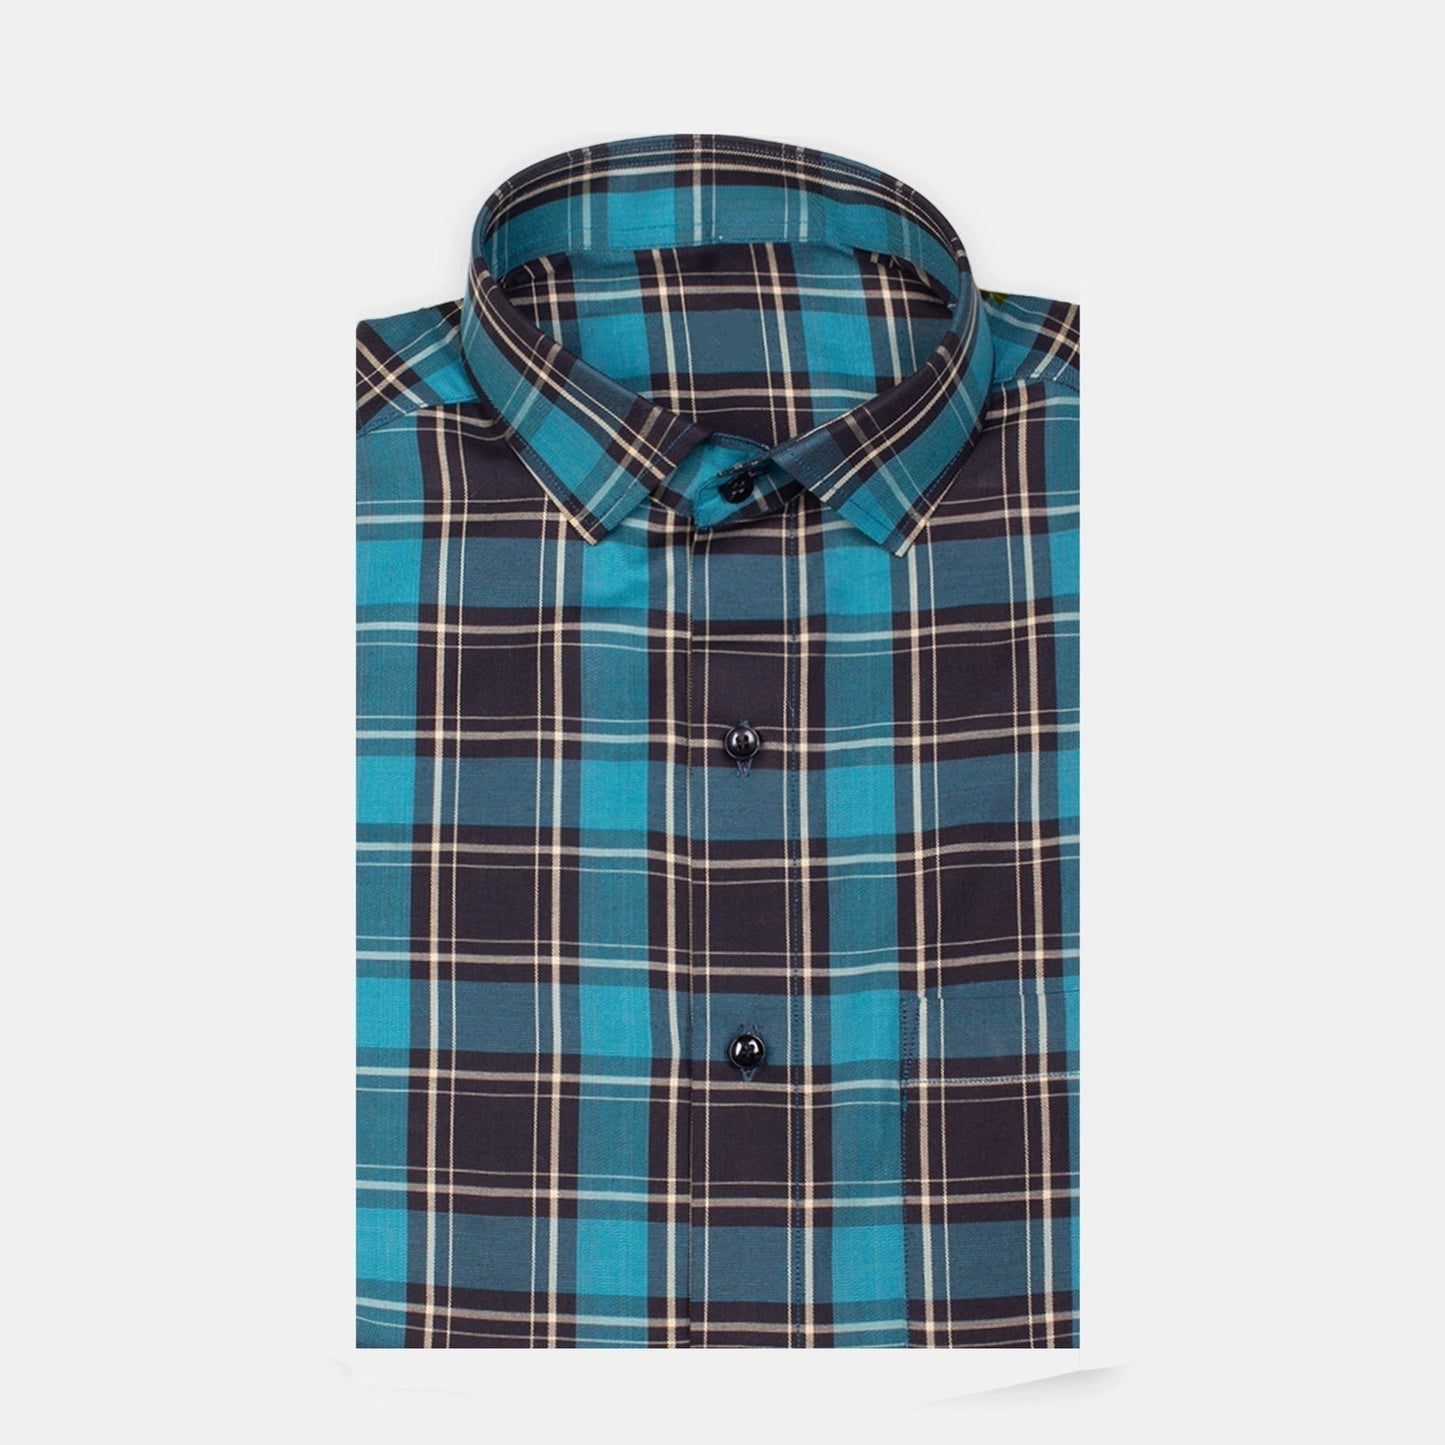 Joysome Men's Full Sleeves Checks Formal Shirt Premium Collection Cotton Fabric English Blue Color